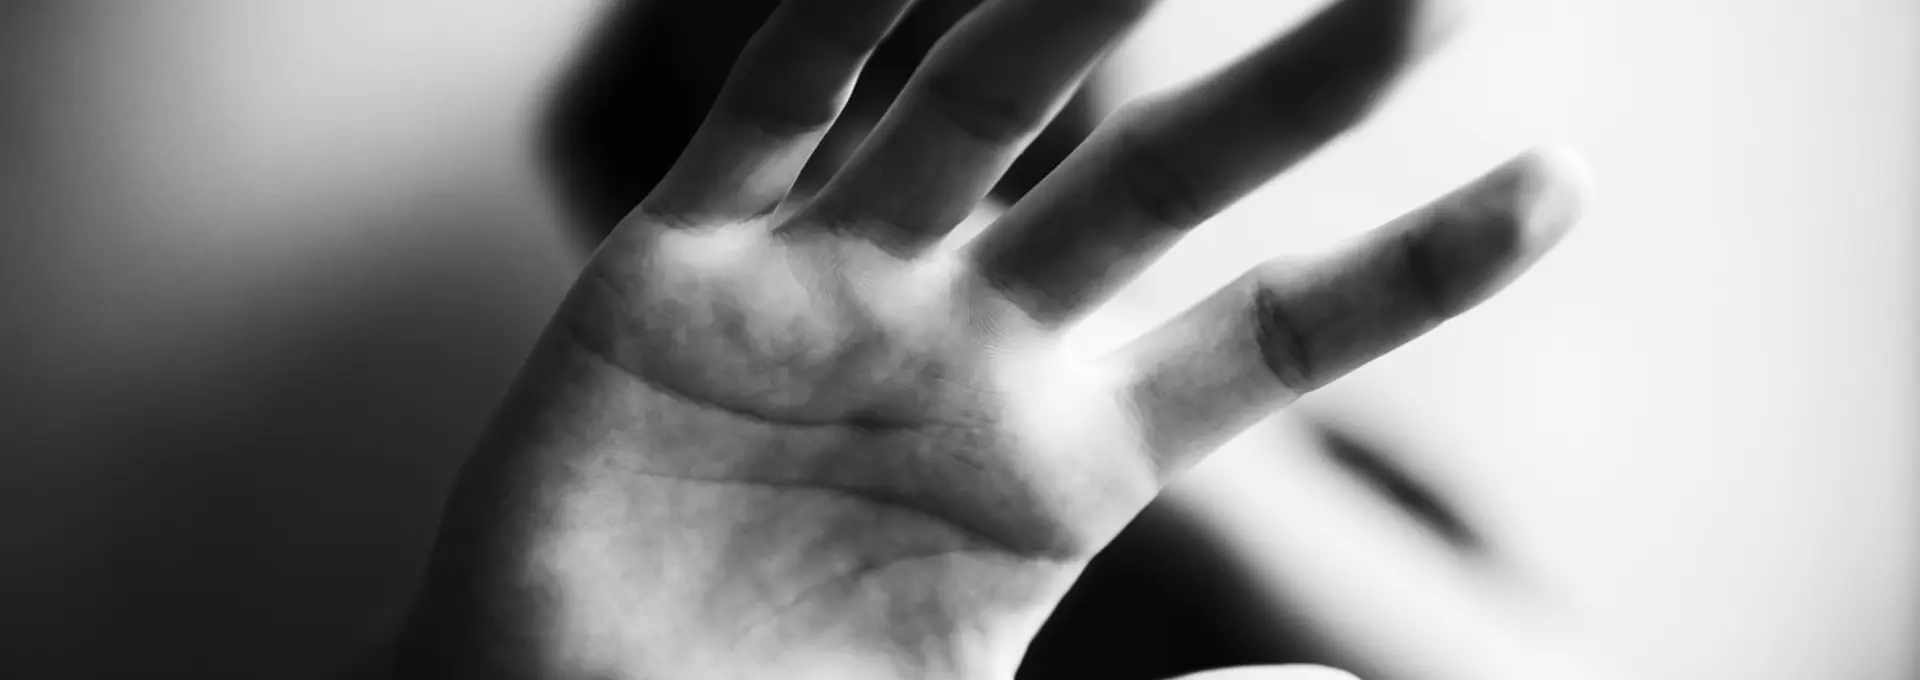 A black and white photo of a hand being held up to the camera gesturing to stop